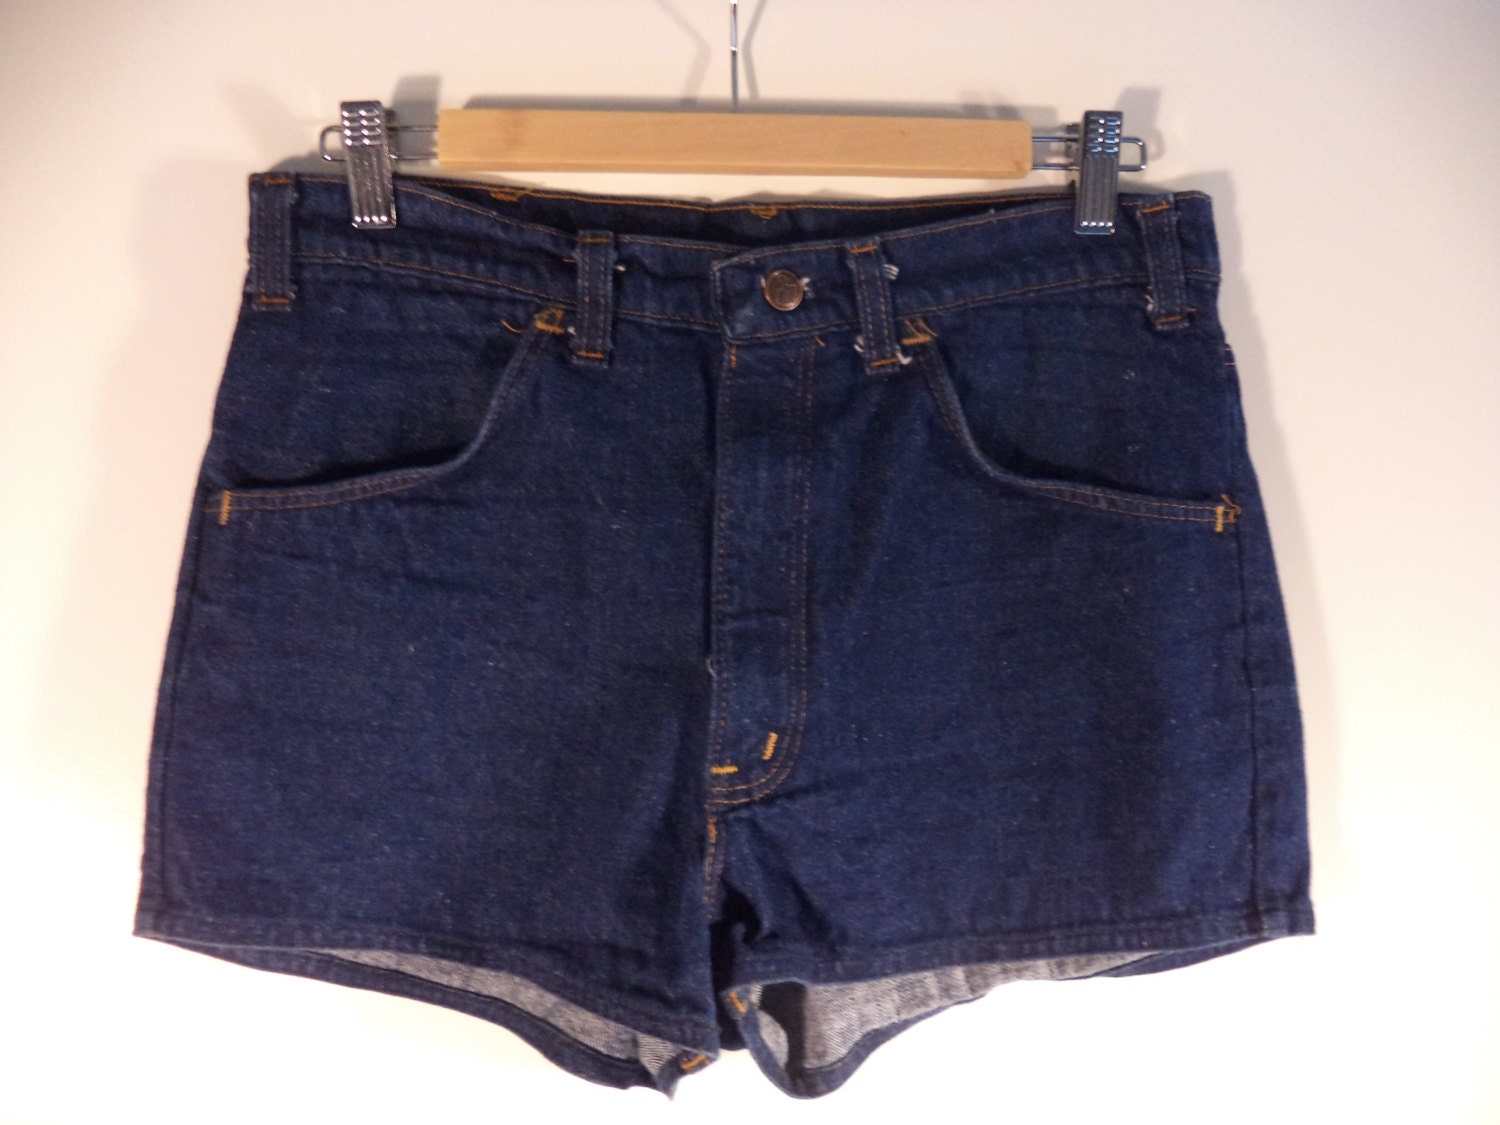 70's Thumbs Up hippie jean shorts// Vintage hitch hiker